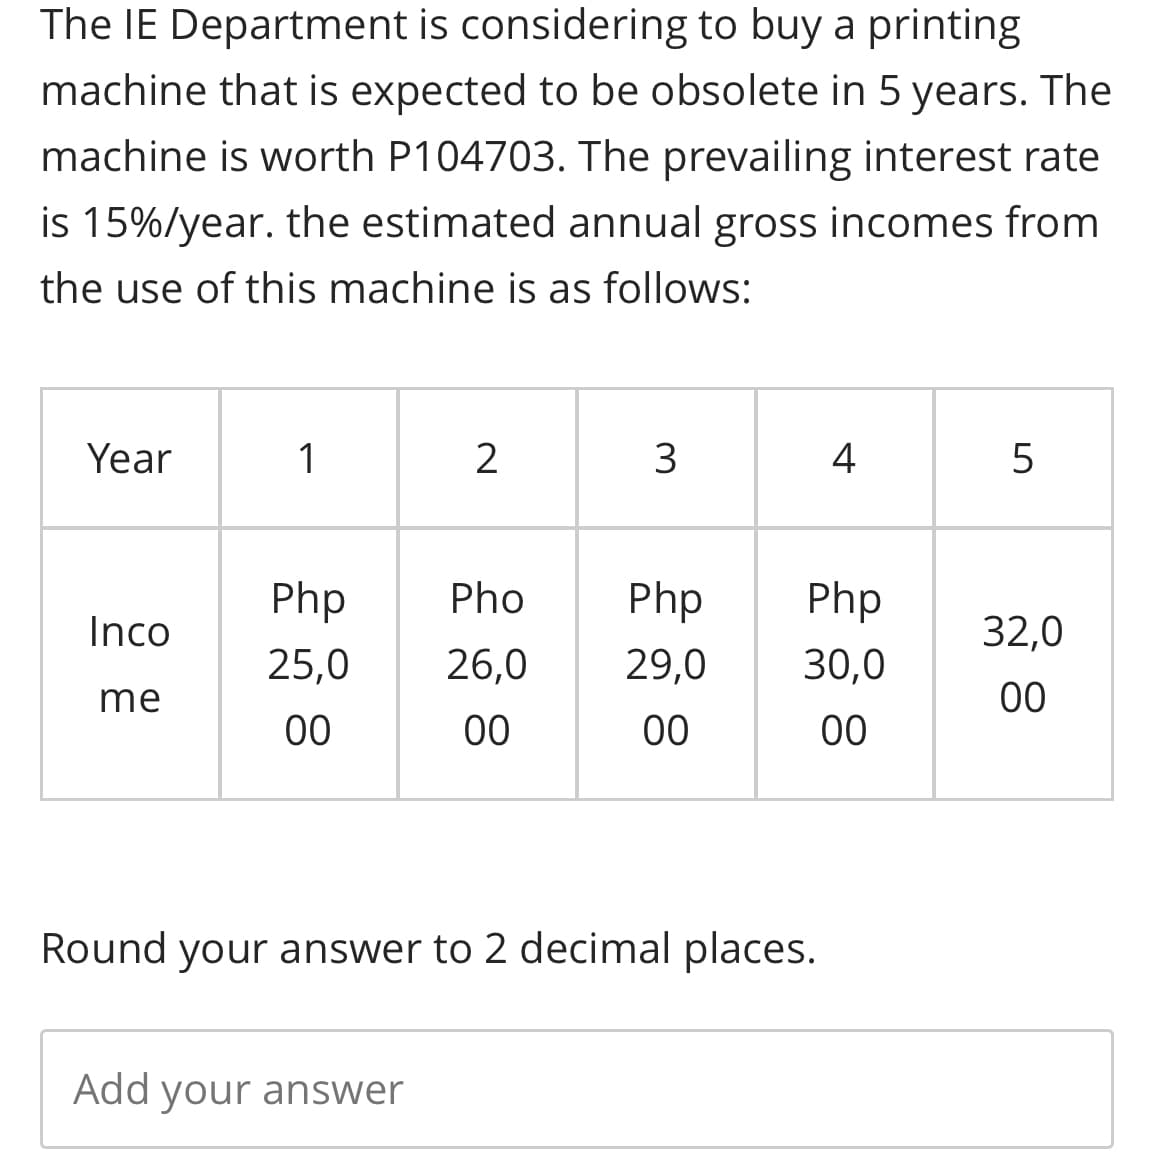 The IE Department is considering to buy a printing
machine that is expected to be obsolete in 5 years. The
machine is worth P104703. The prevailing interest rate
is 15%/year. the estimated annual gross incomes from
the use of this machine is as follows:
Year
Inco
me
1
2
Php Pho
25,0 26,0
00
00
Add your answer
3
Round your answer to 2 decimal places.
4
Php
Php
29,0 30,0
00
00
5
32,0
00